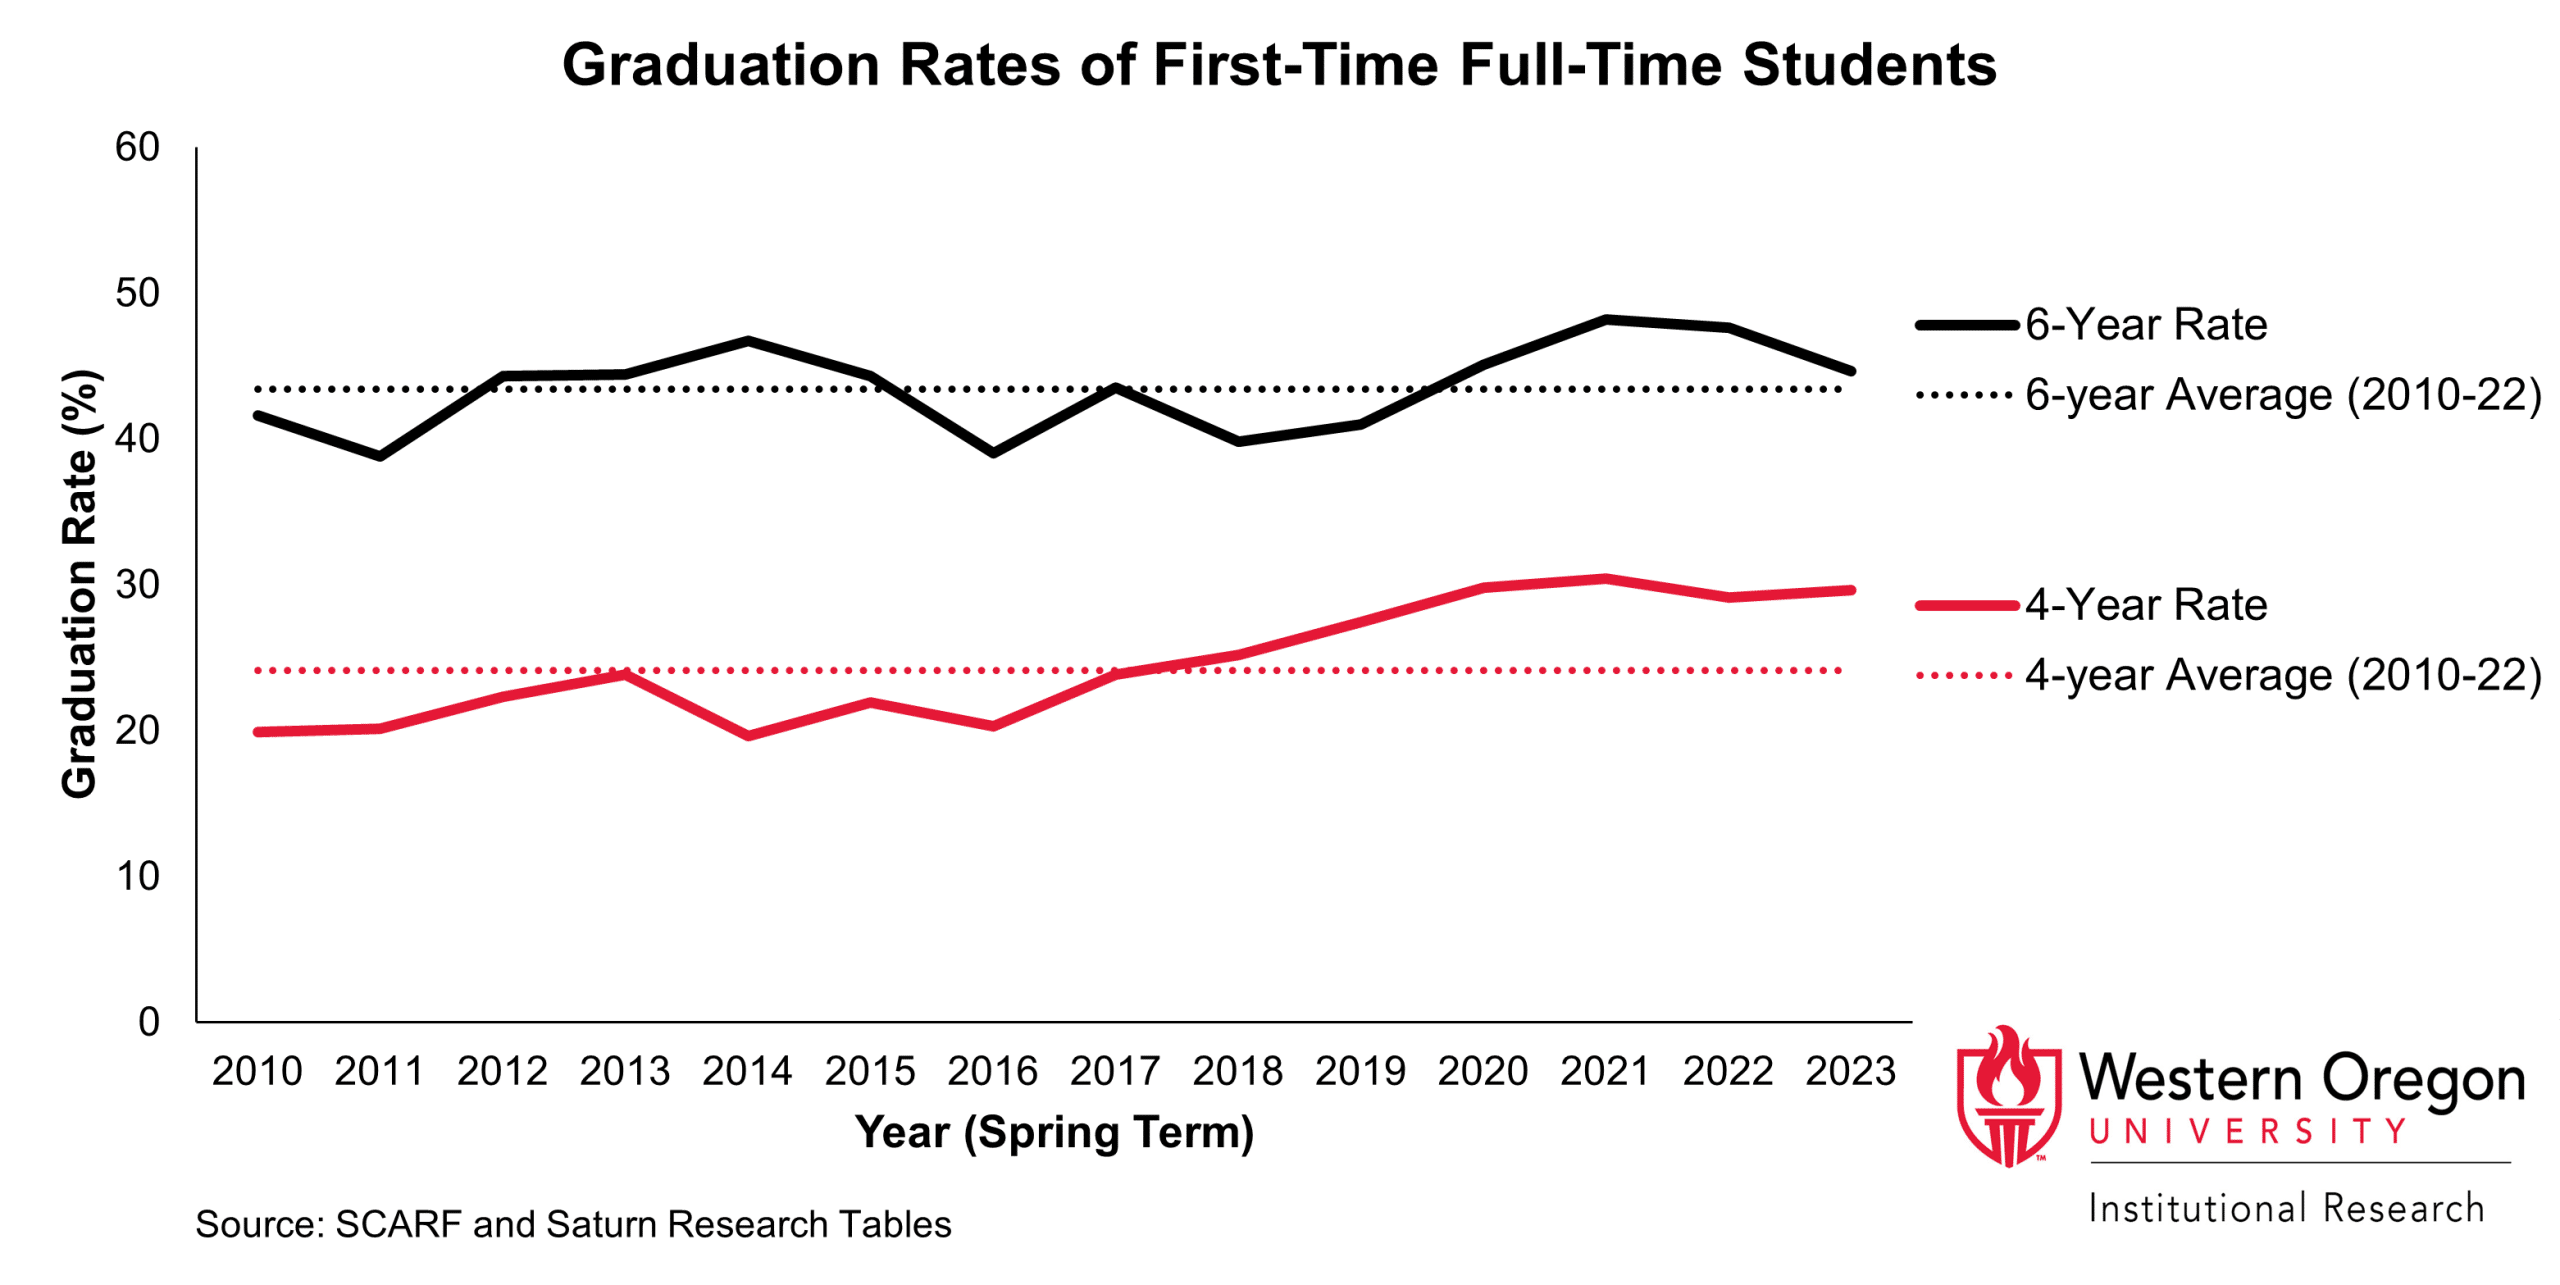 4-year graduation rates have been steadily rising since 2017. 6-year rates decreased slightly in the last two years, but are still higher than the WOU historical average.